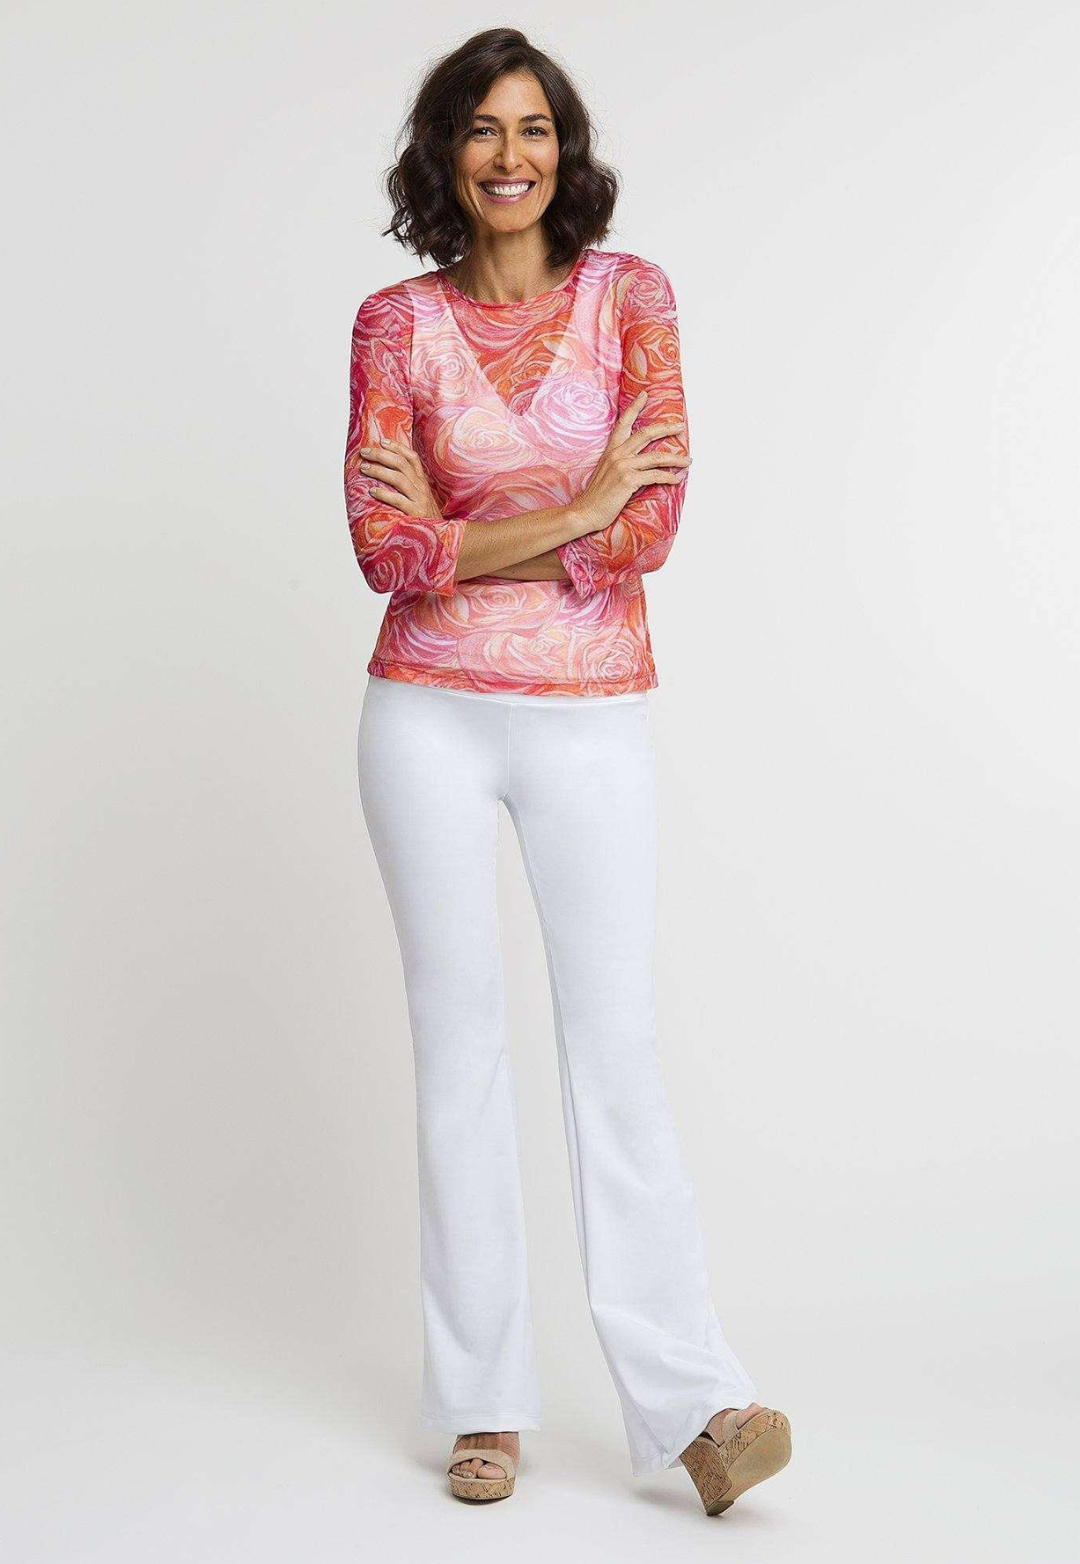 Woman wearing mesh pink and orange flower printed shirt over stretch knit white v neck tank top and pants by Ala von Auersperg